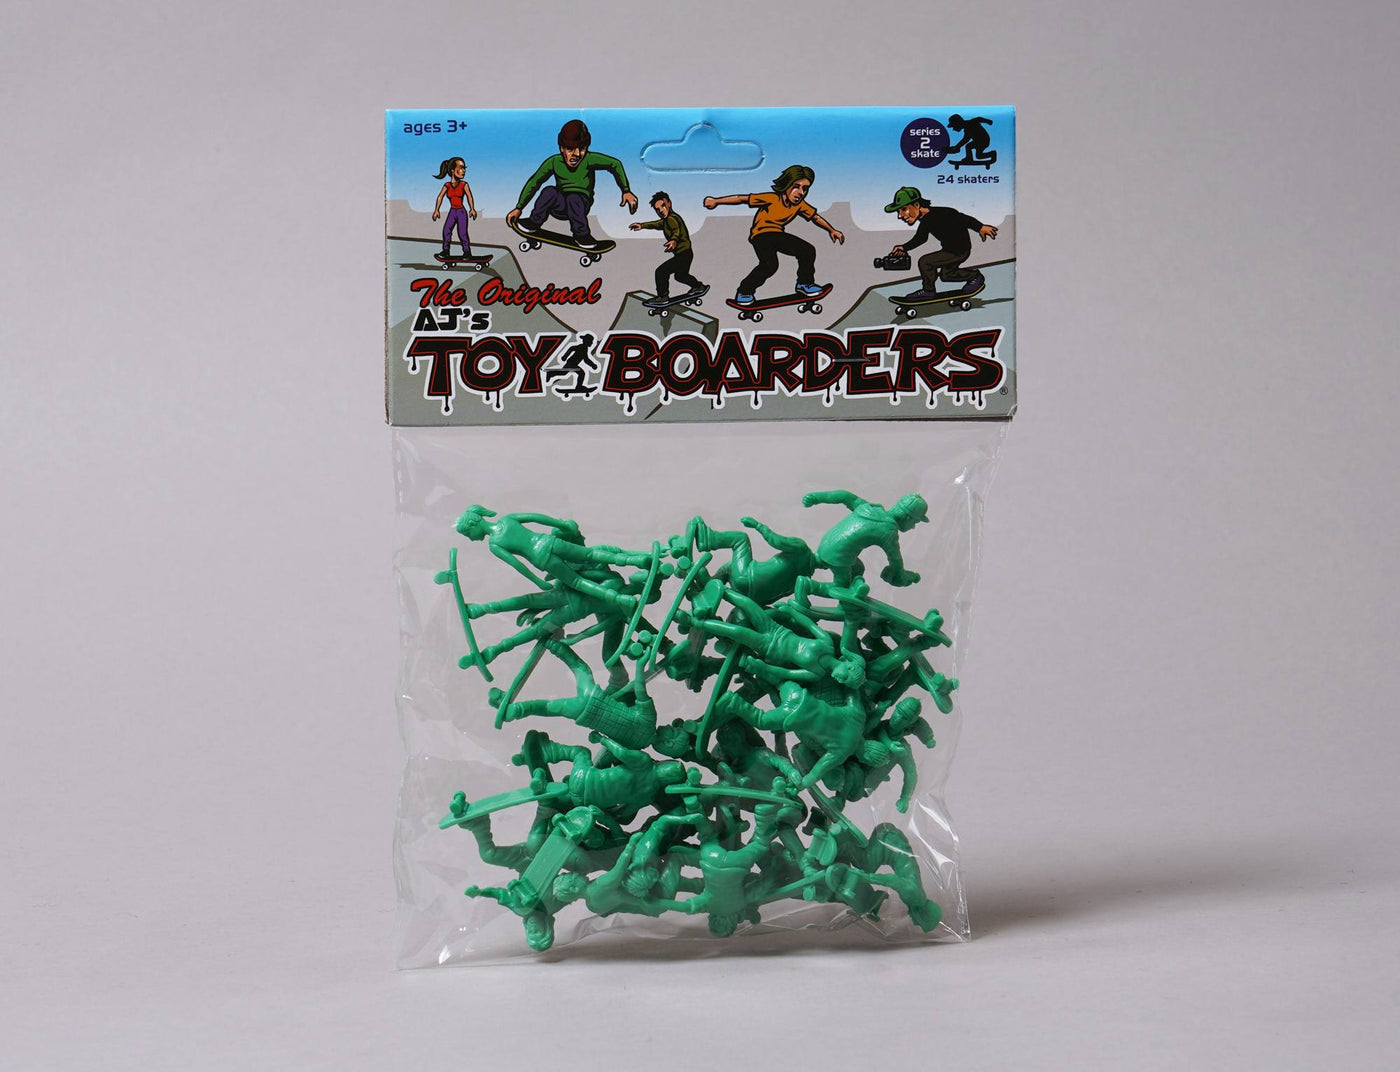 Accessories Random Toy Boarders Skate Series #2 Toy Boarders Toys / Green / One Size